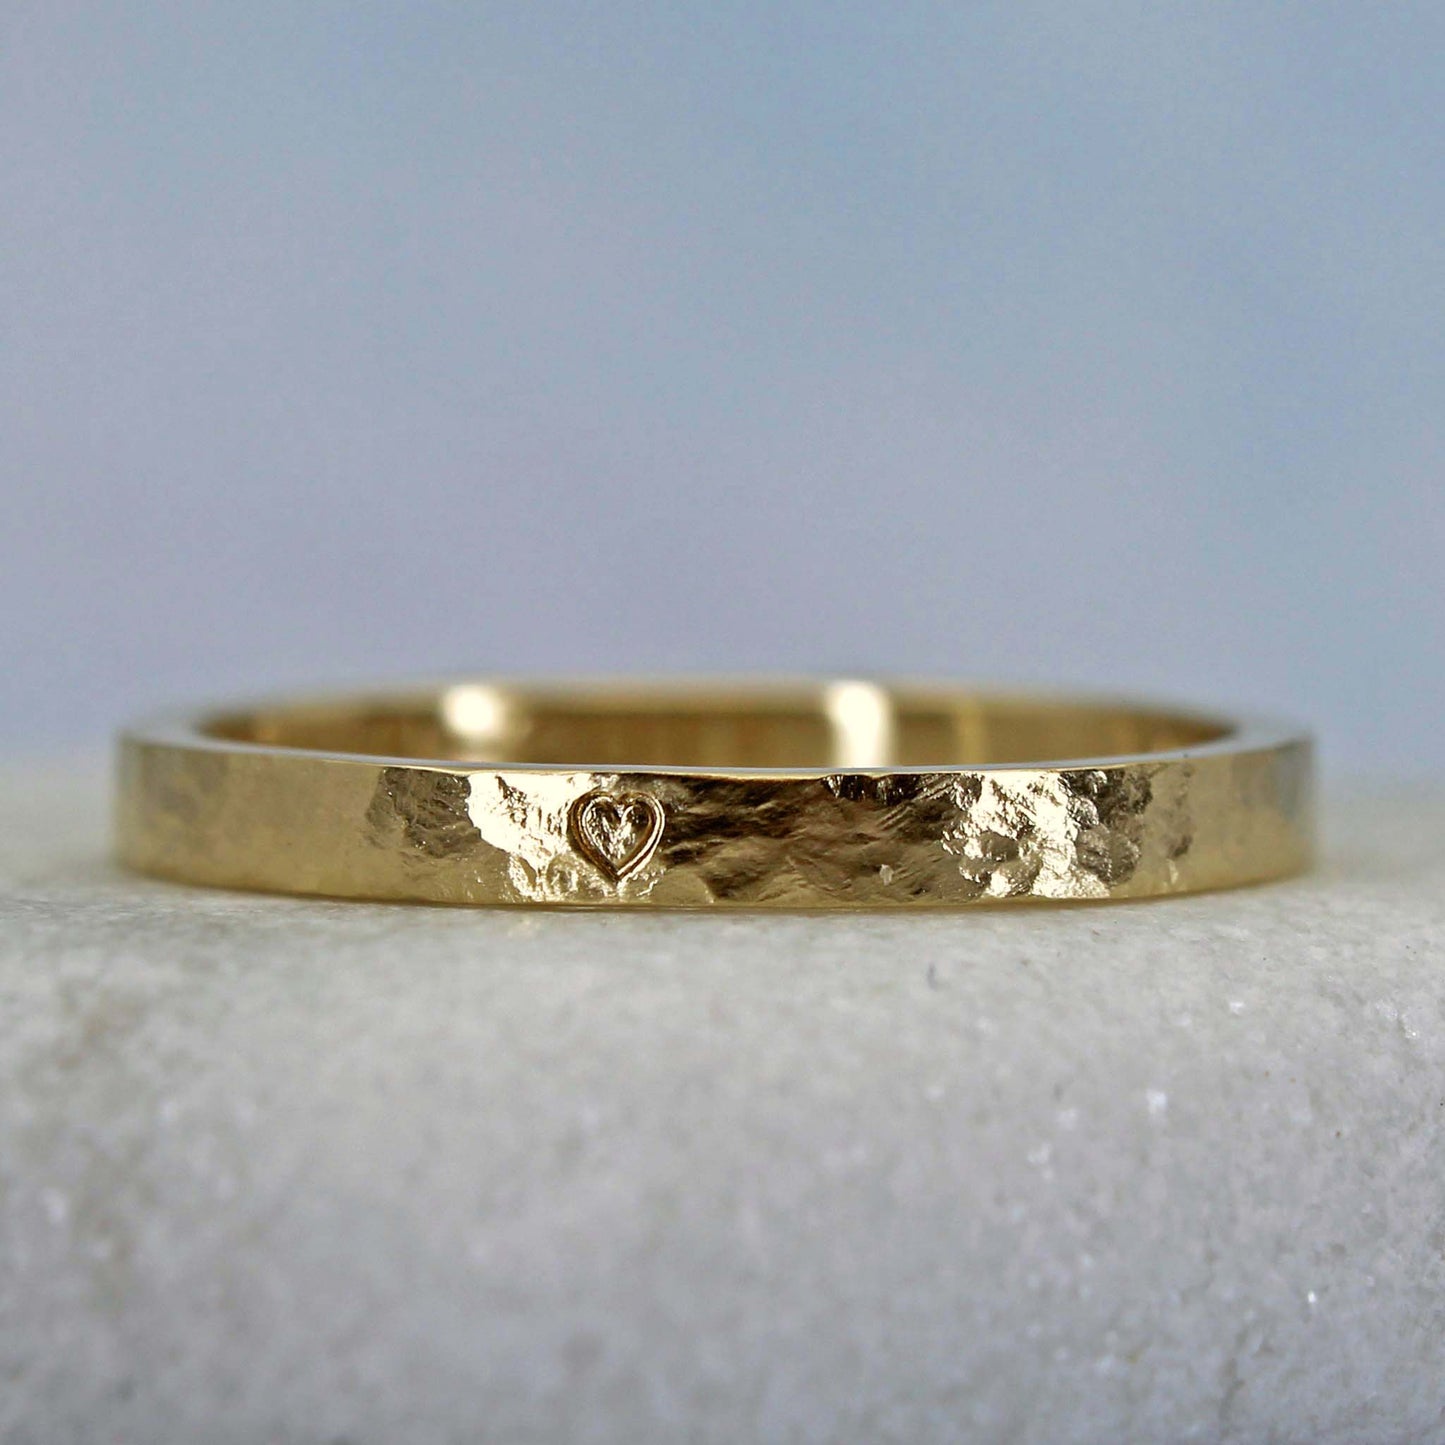 14k stacking ring with a rustic hammered finish and a little heart stamp.